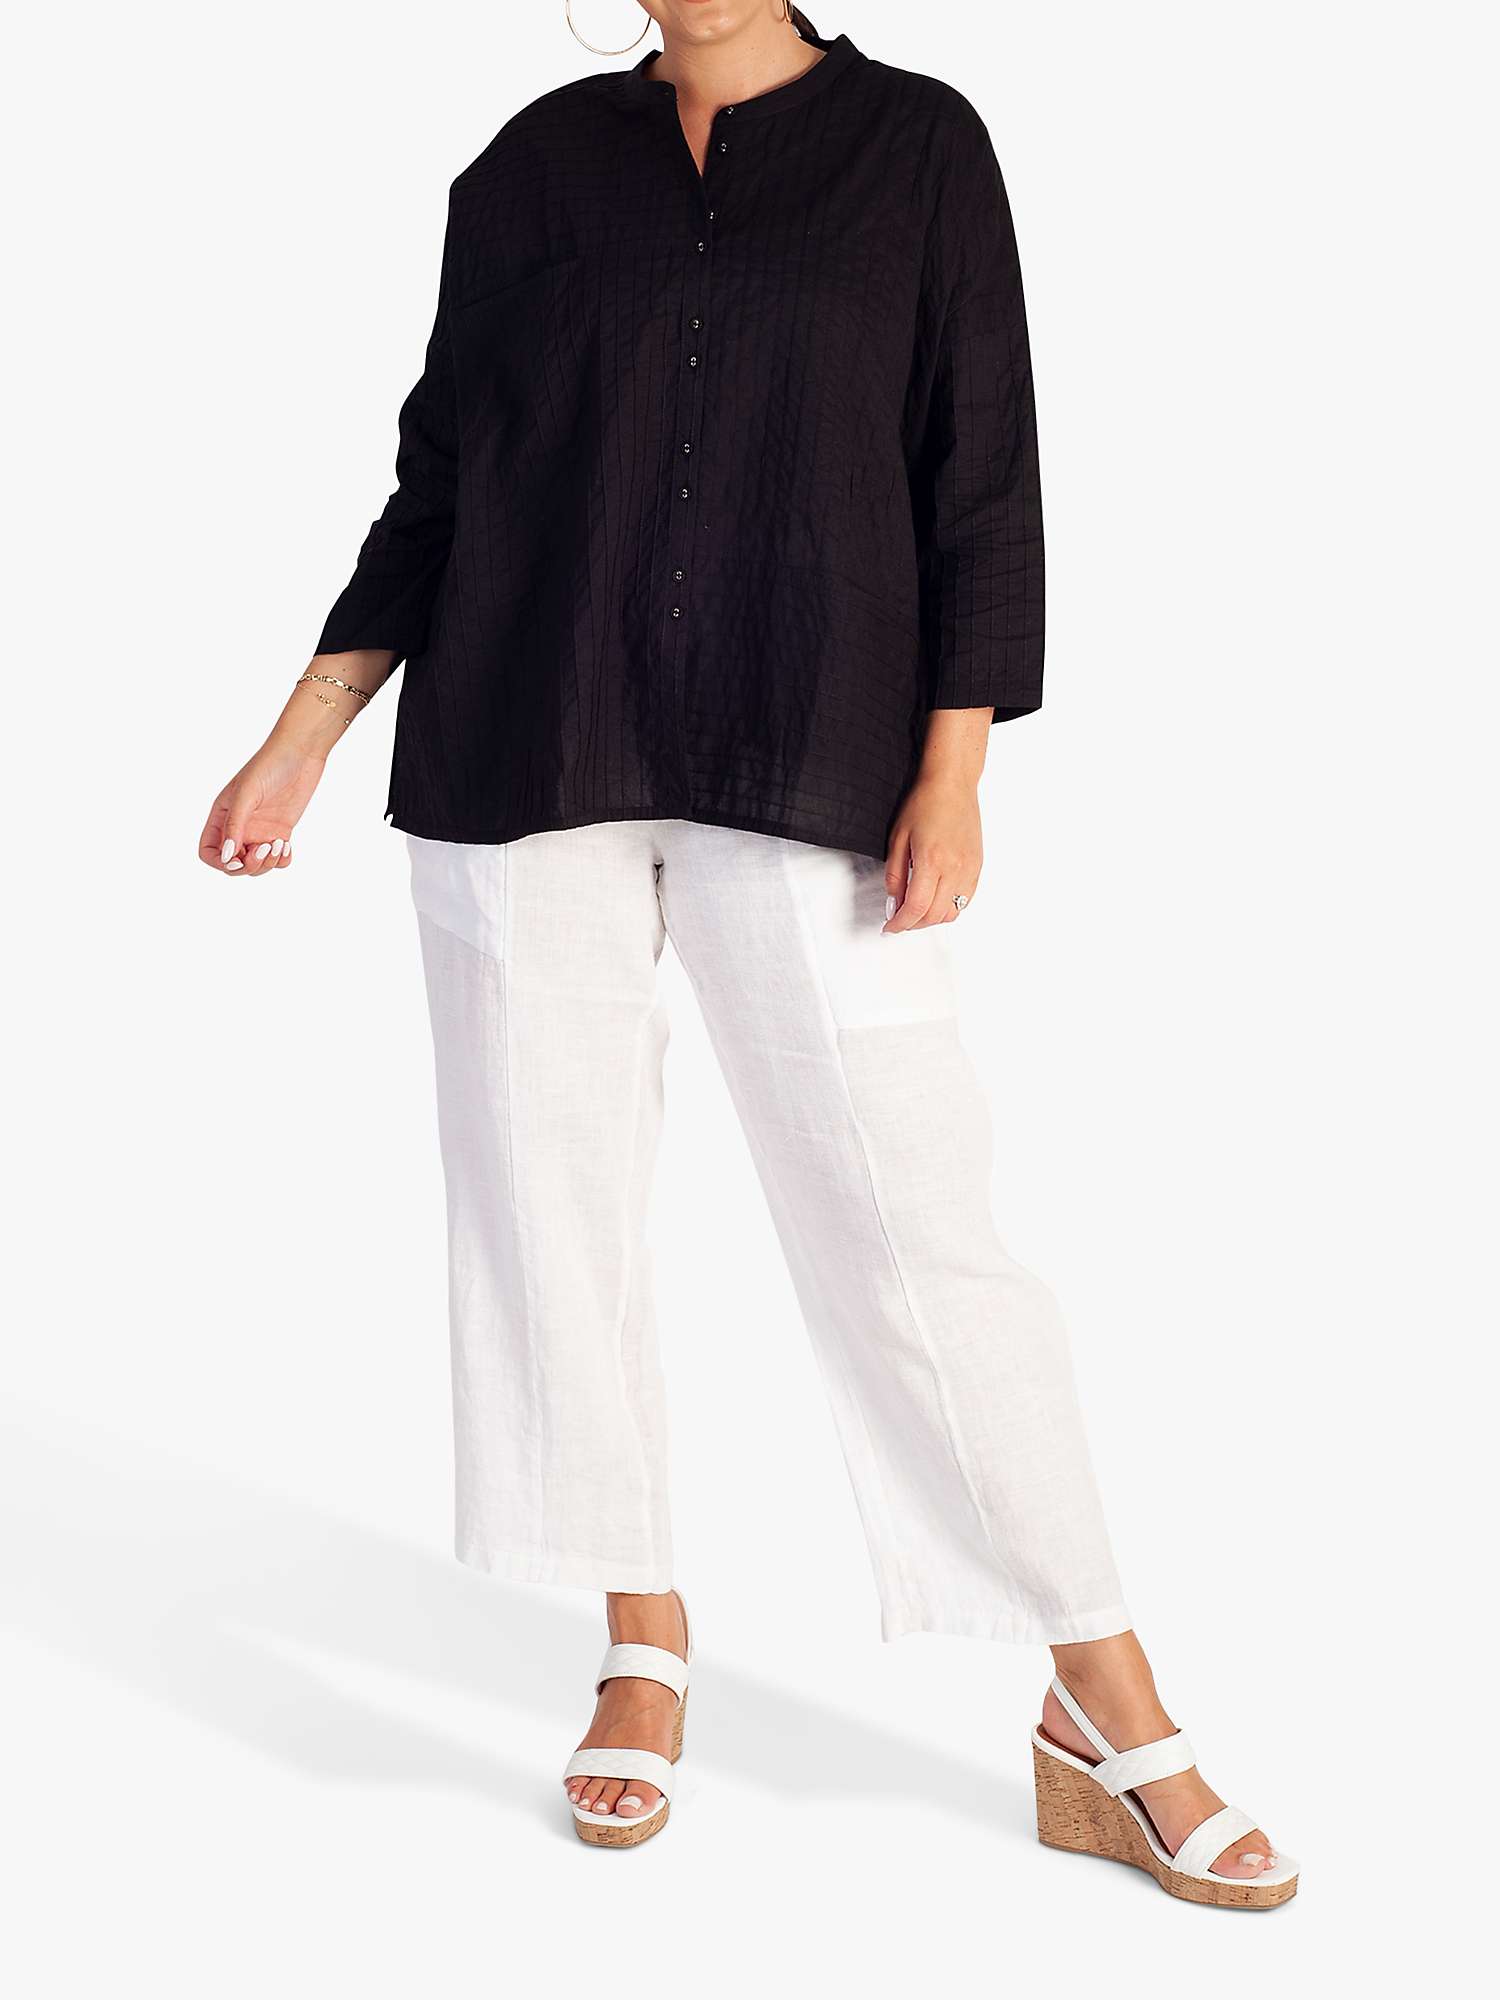 Buy chesca Collarless Textured Shirt Online at johnlewis.com